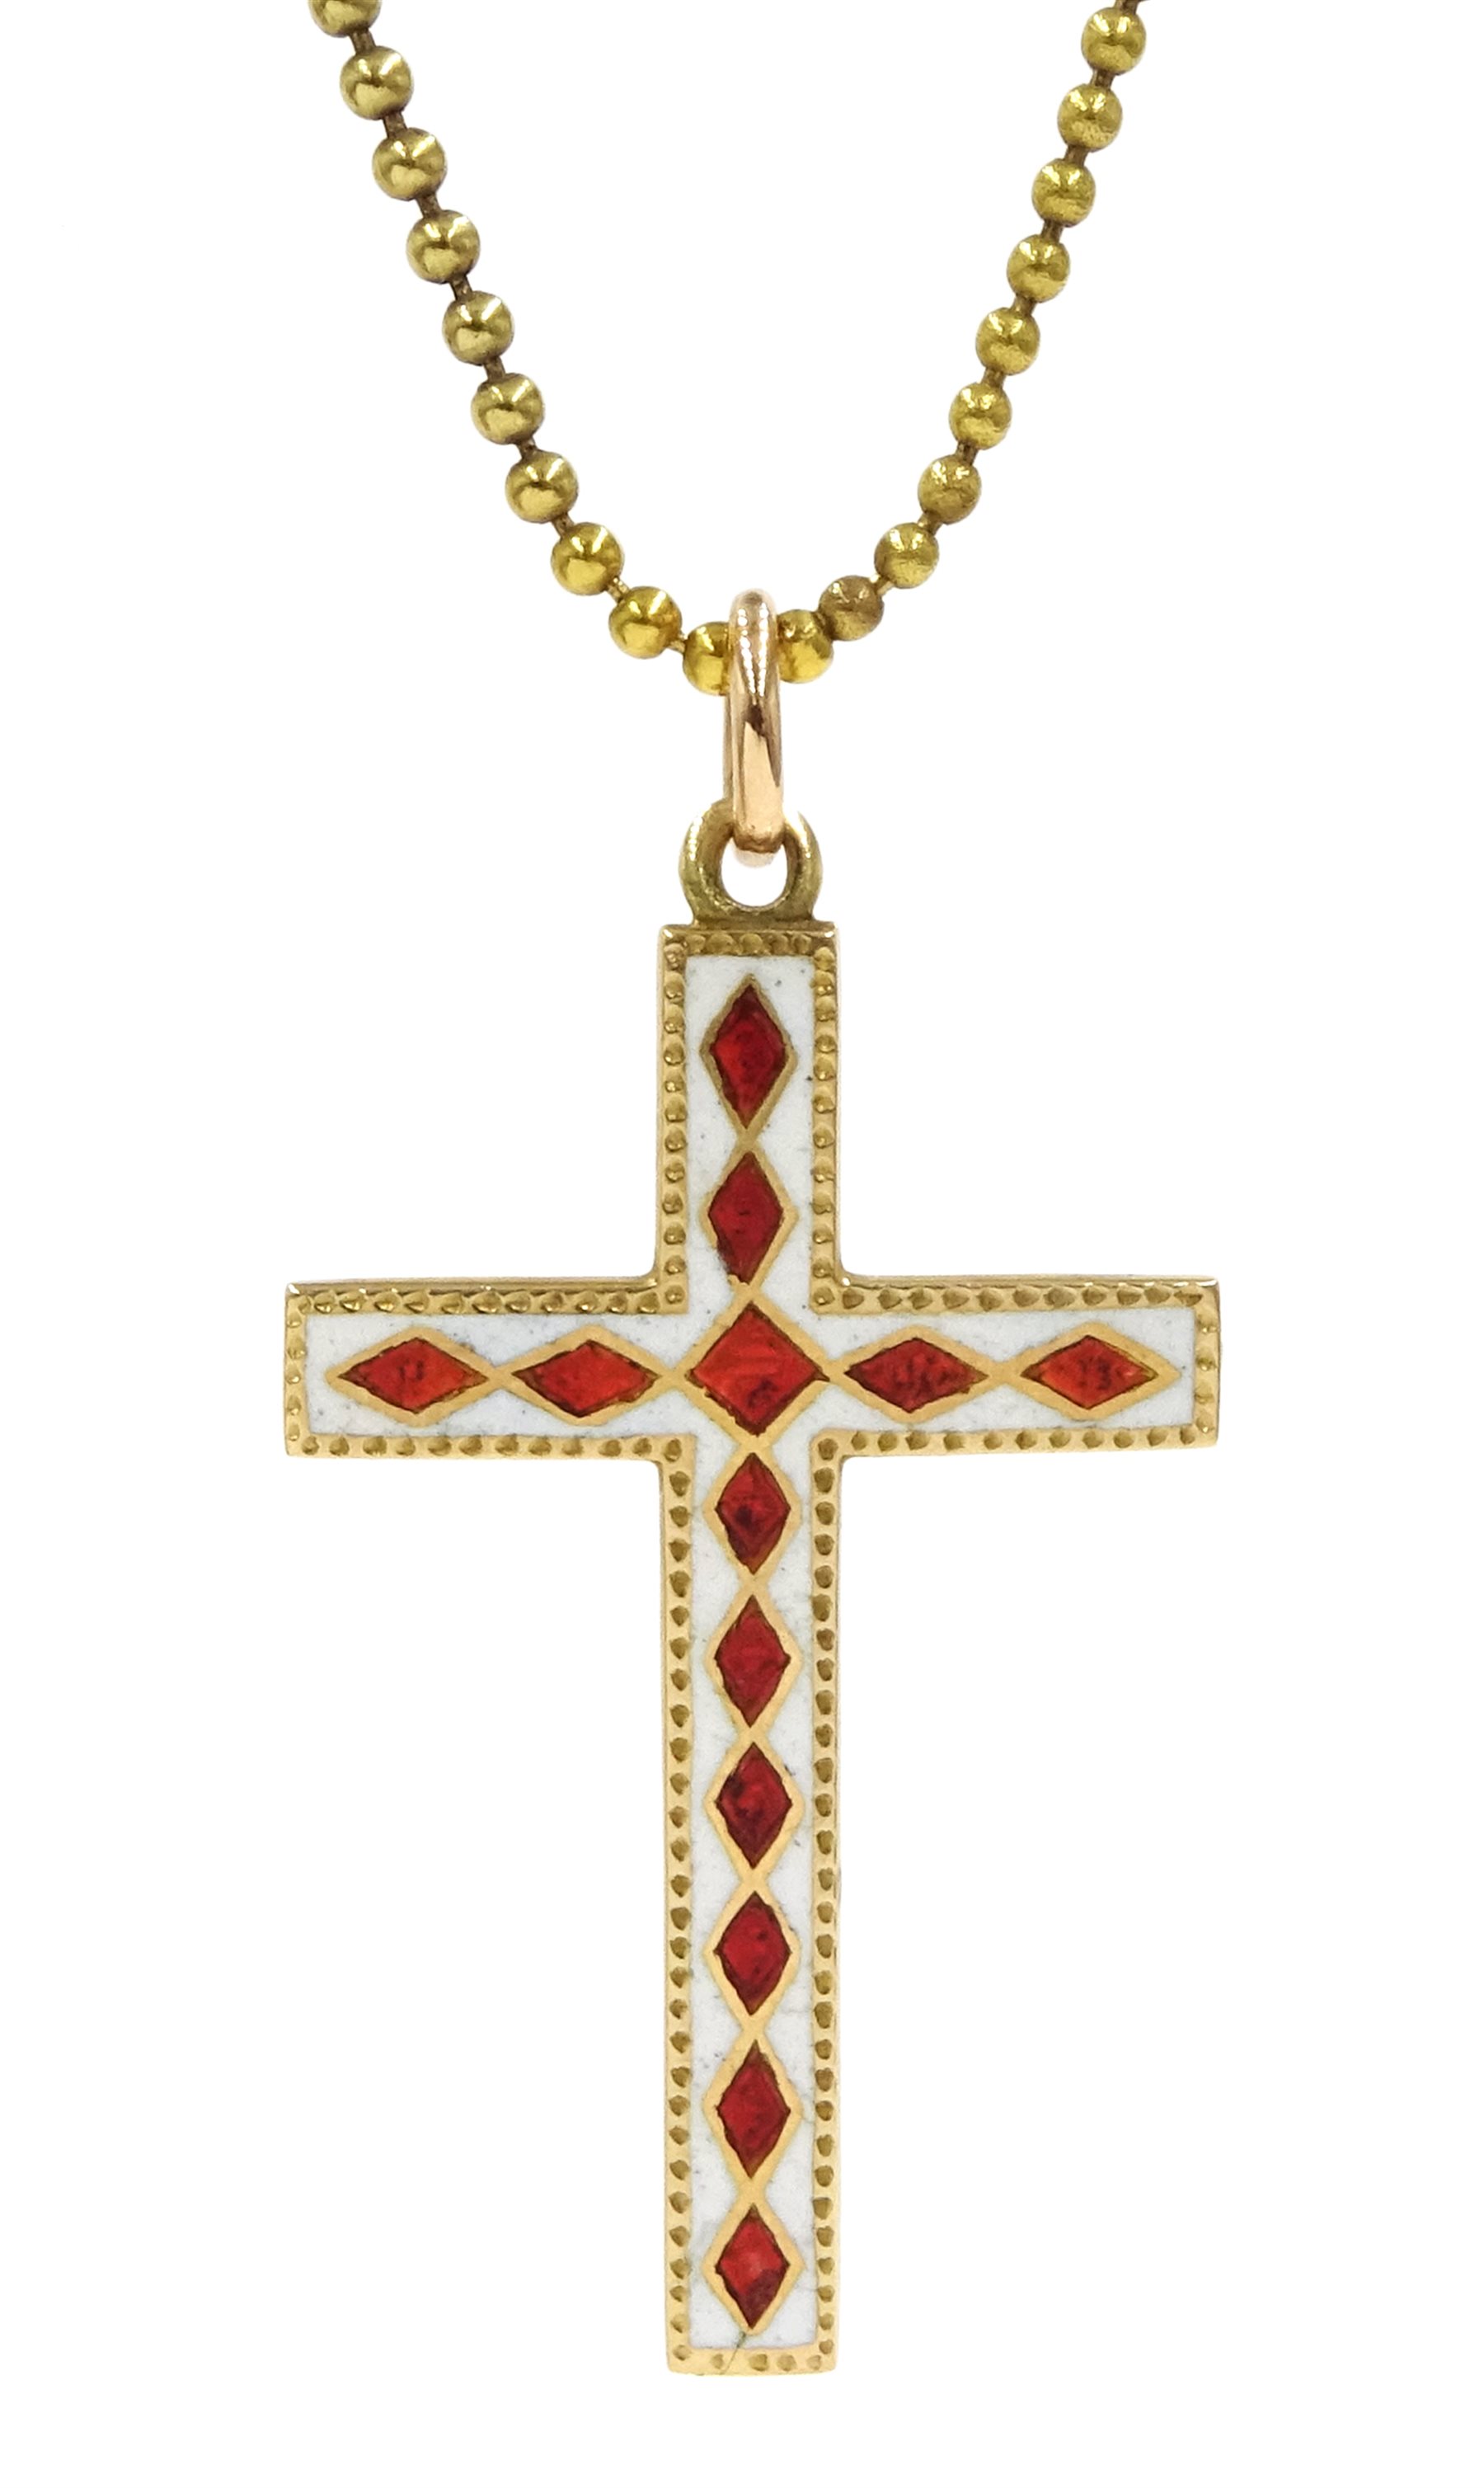 Gold red and white enamel gold cross pendant stamped 15ct, on 18ct gold ball chain necklace with ba